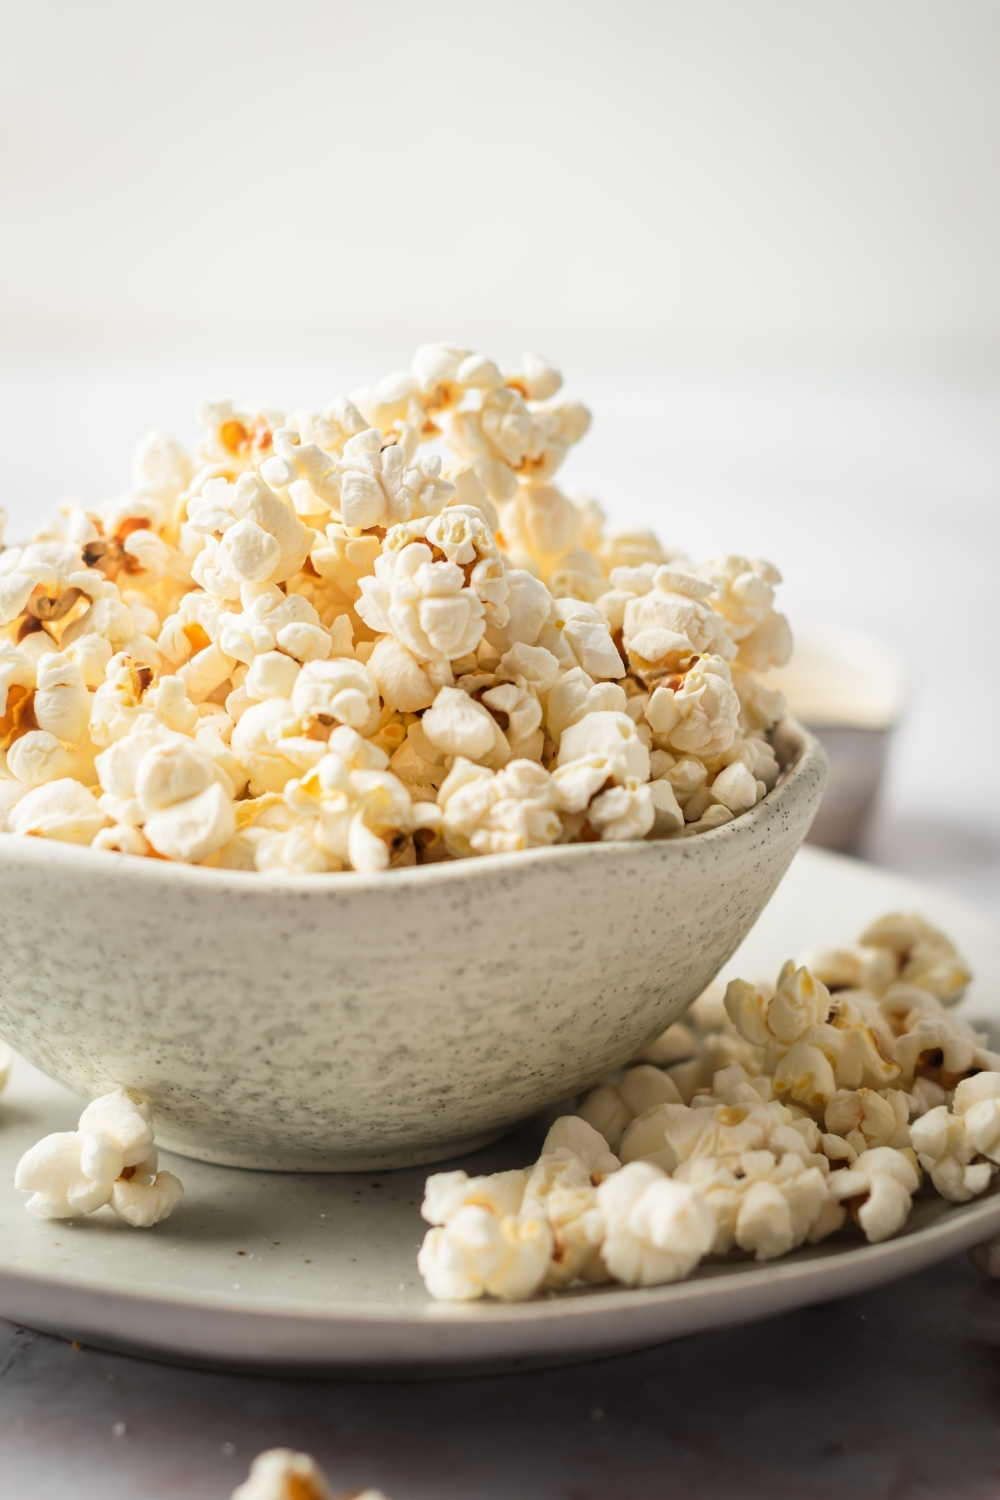 A white bowl filled with popcorn on top of a plate with a few pieces of popcorn on it.